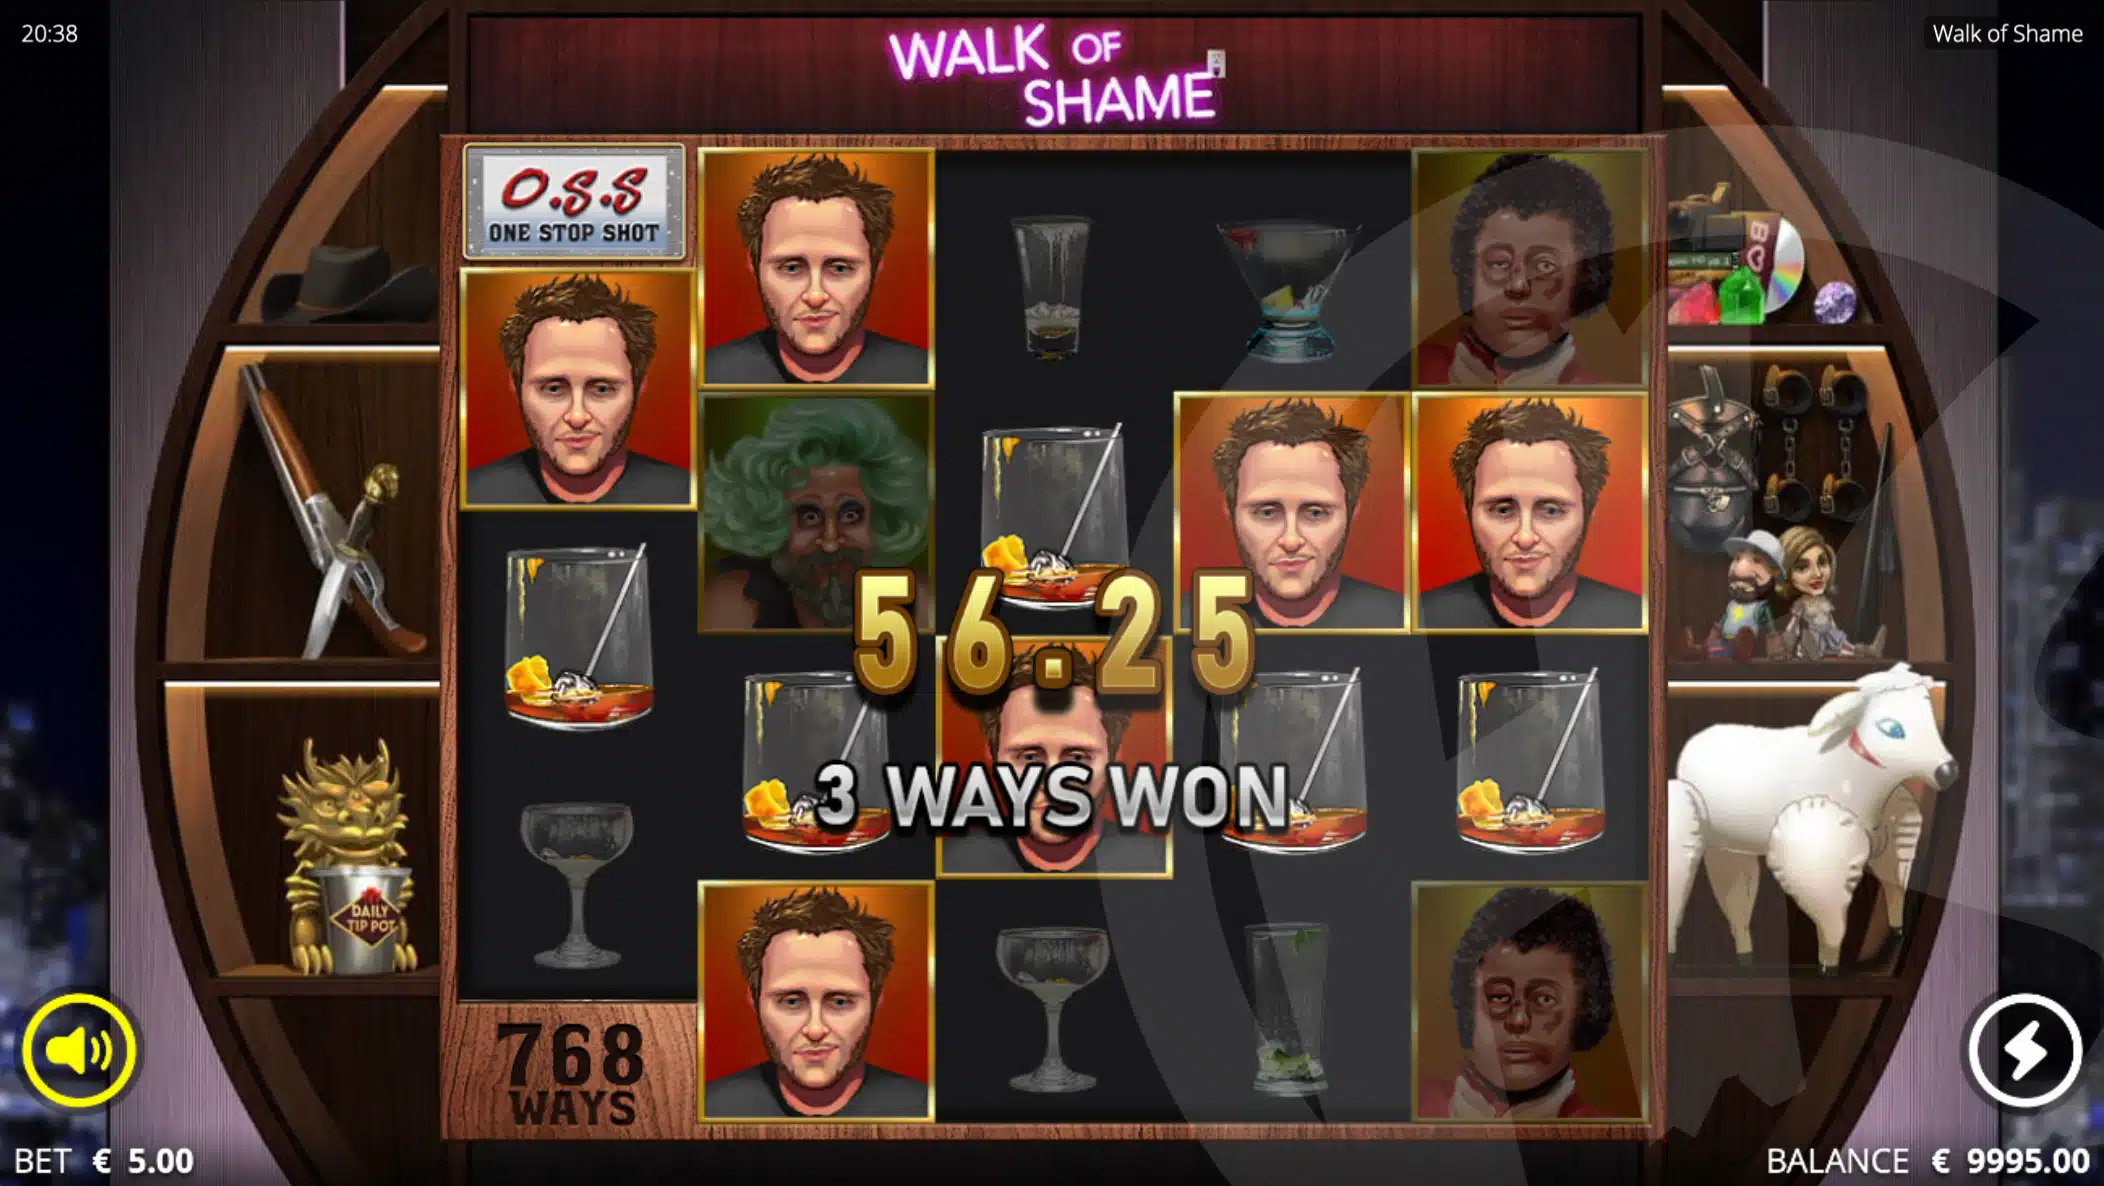 Walk of Shame Offers Players 768 Ways to Win